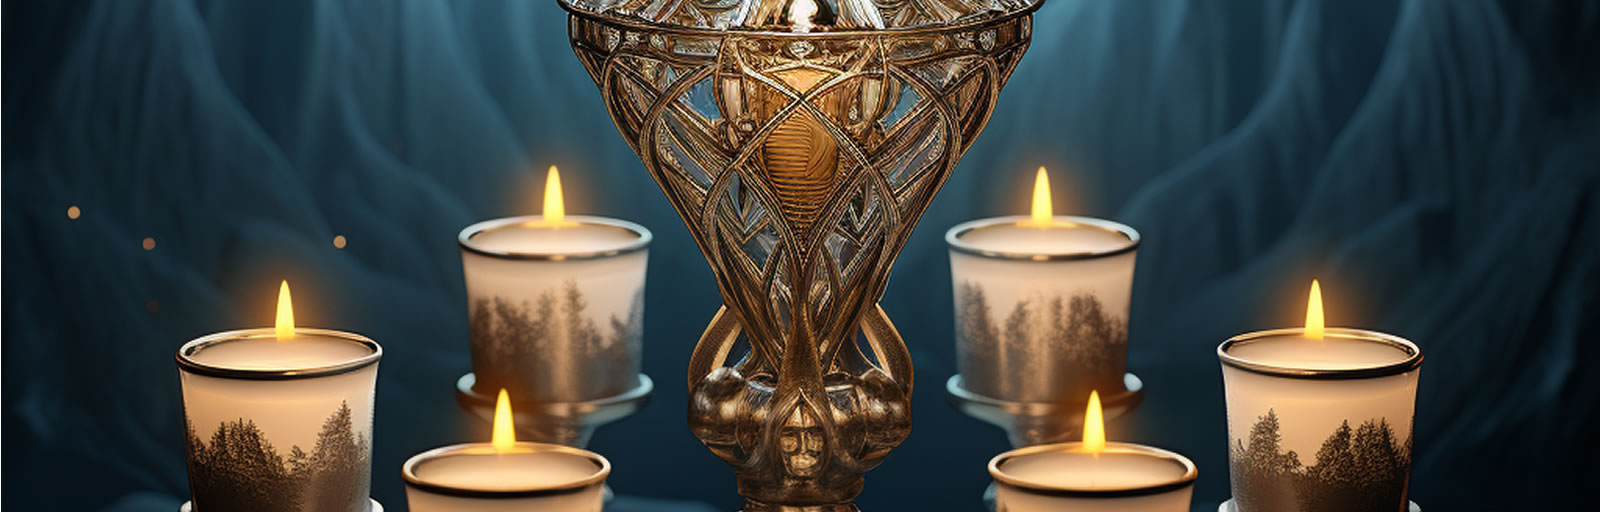 Featured image for “Six of Cups Meaning”